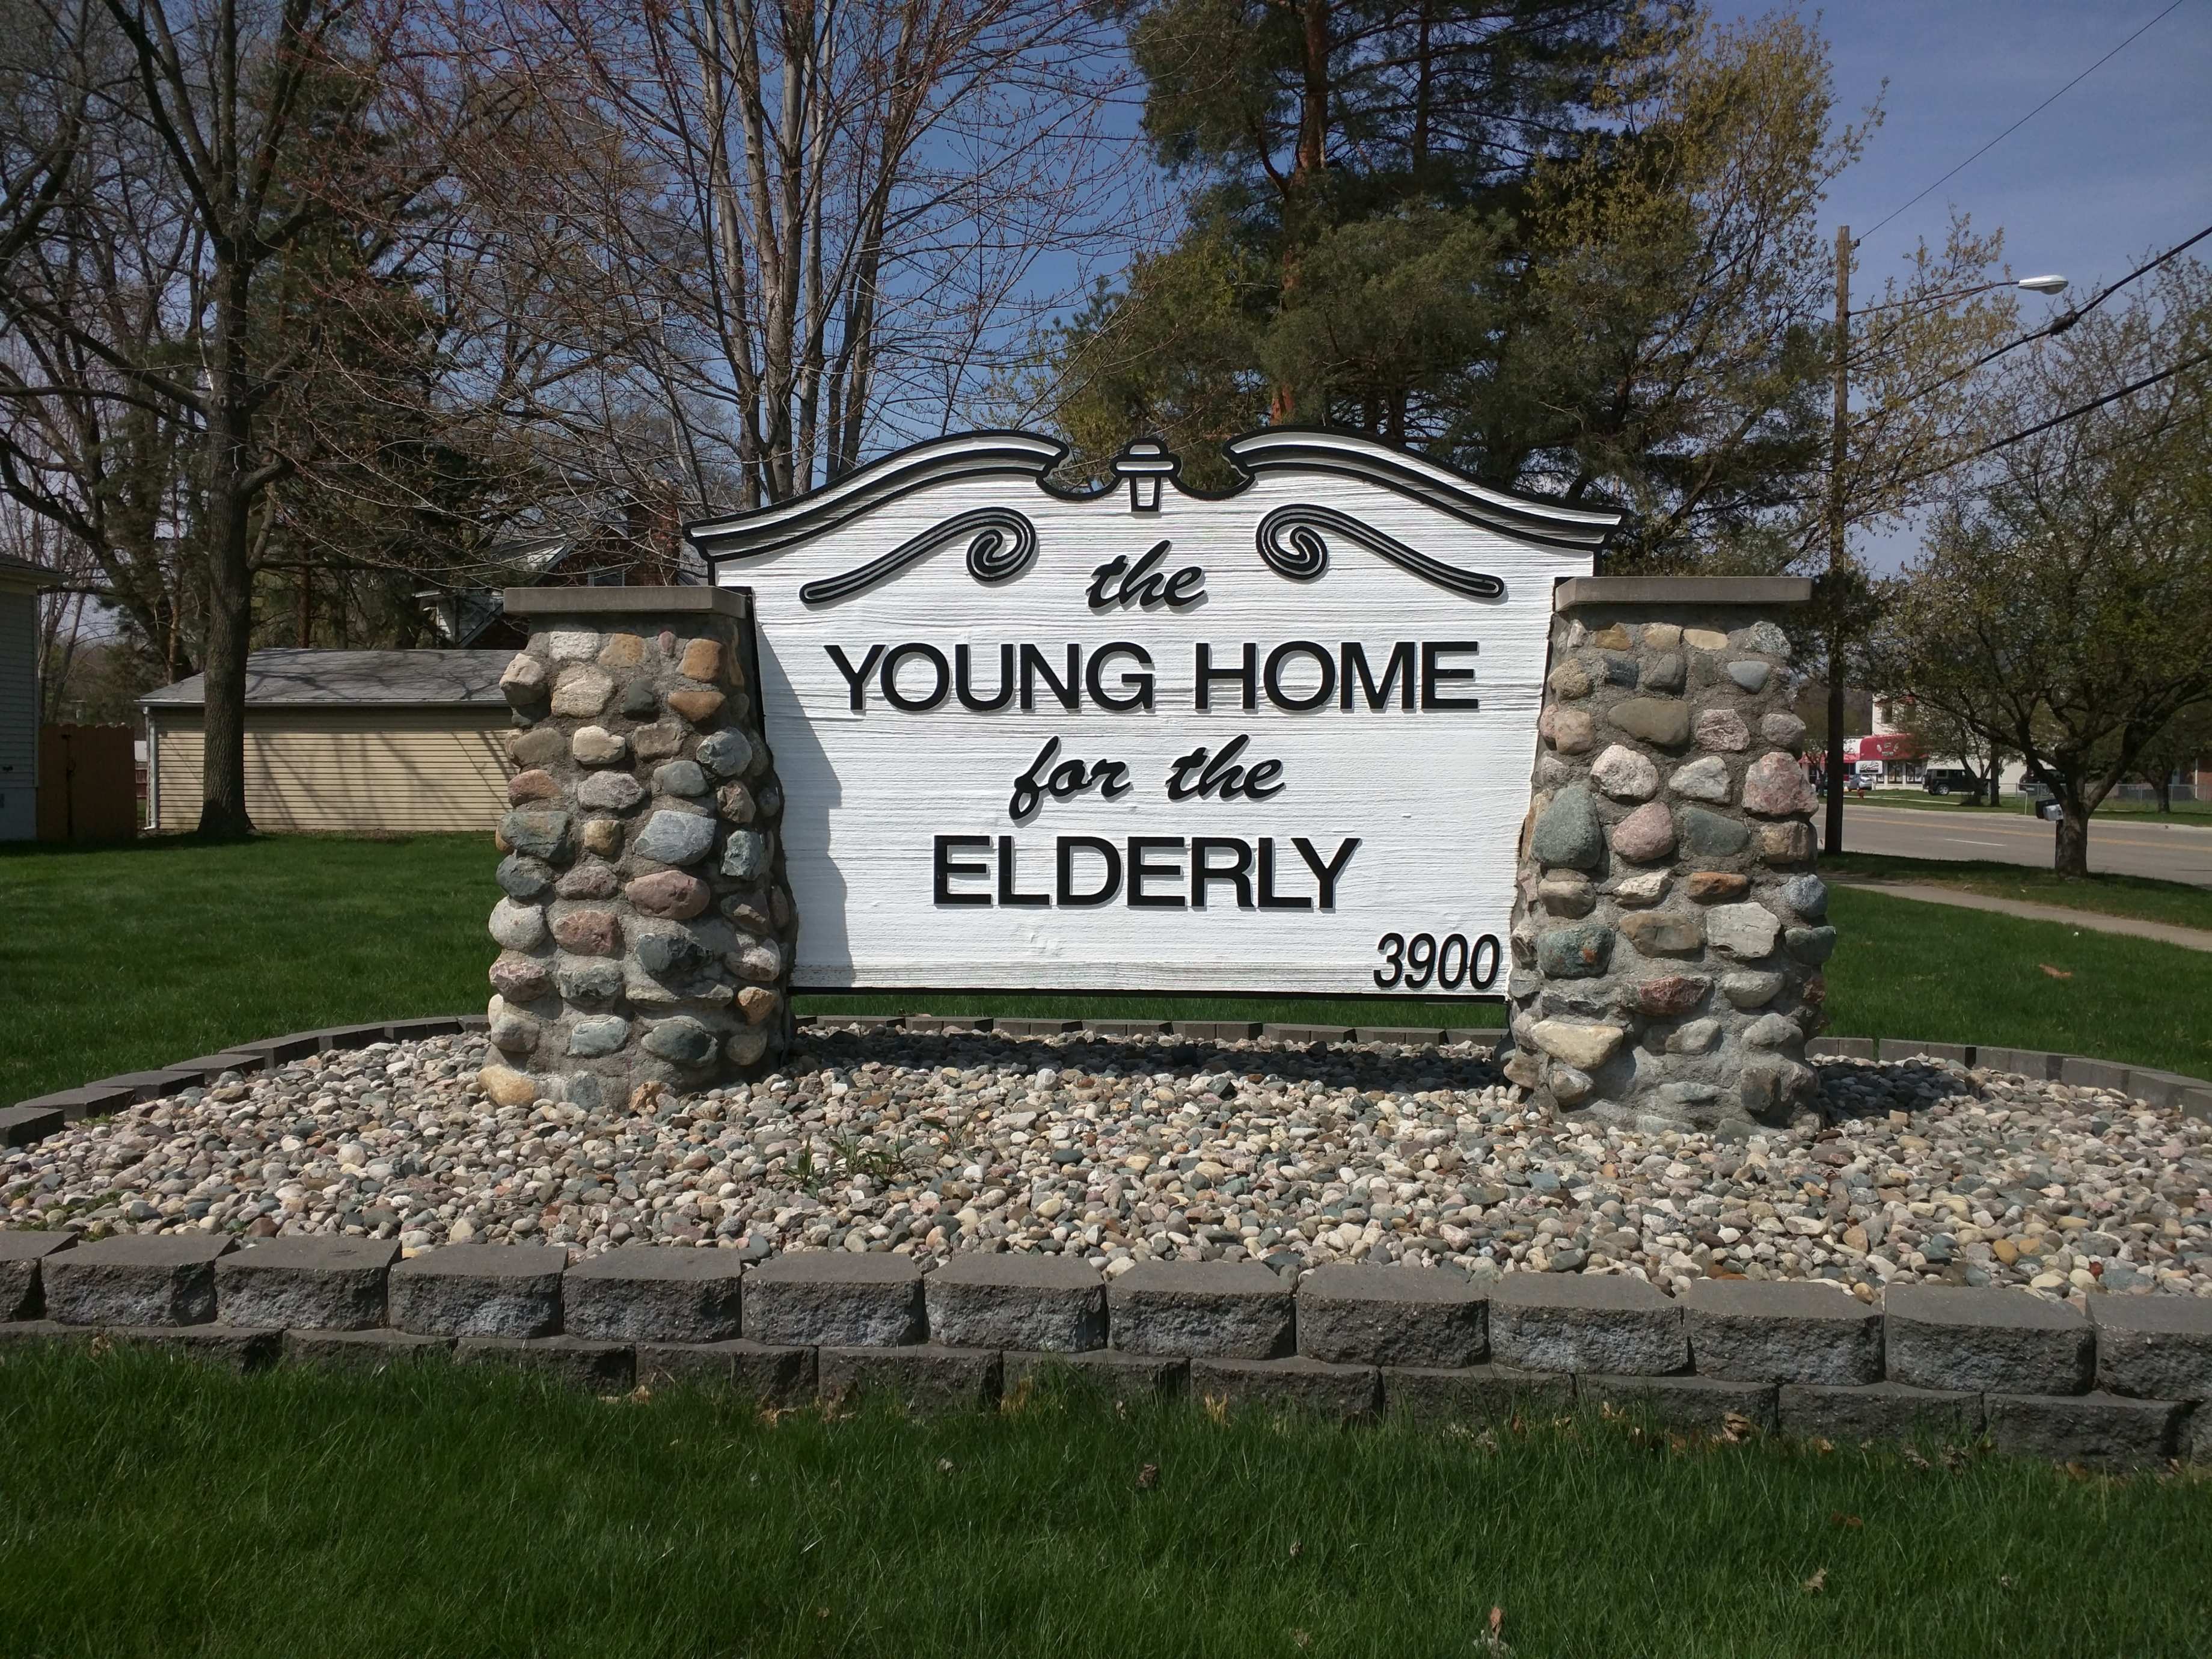 The Young Home for the Elderly image